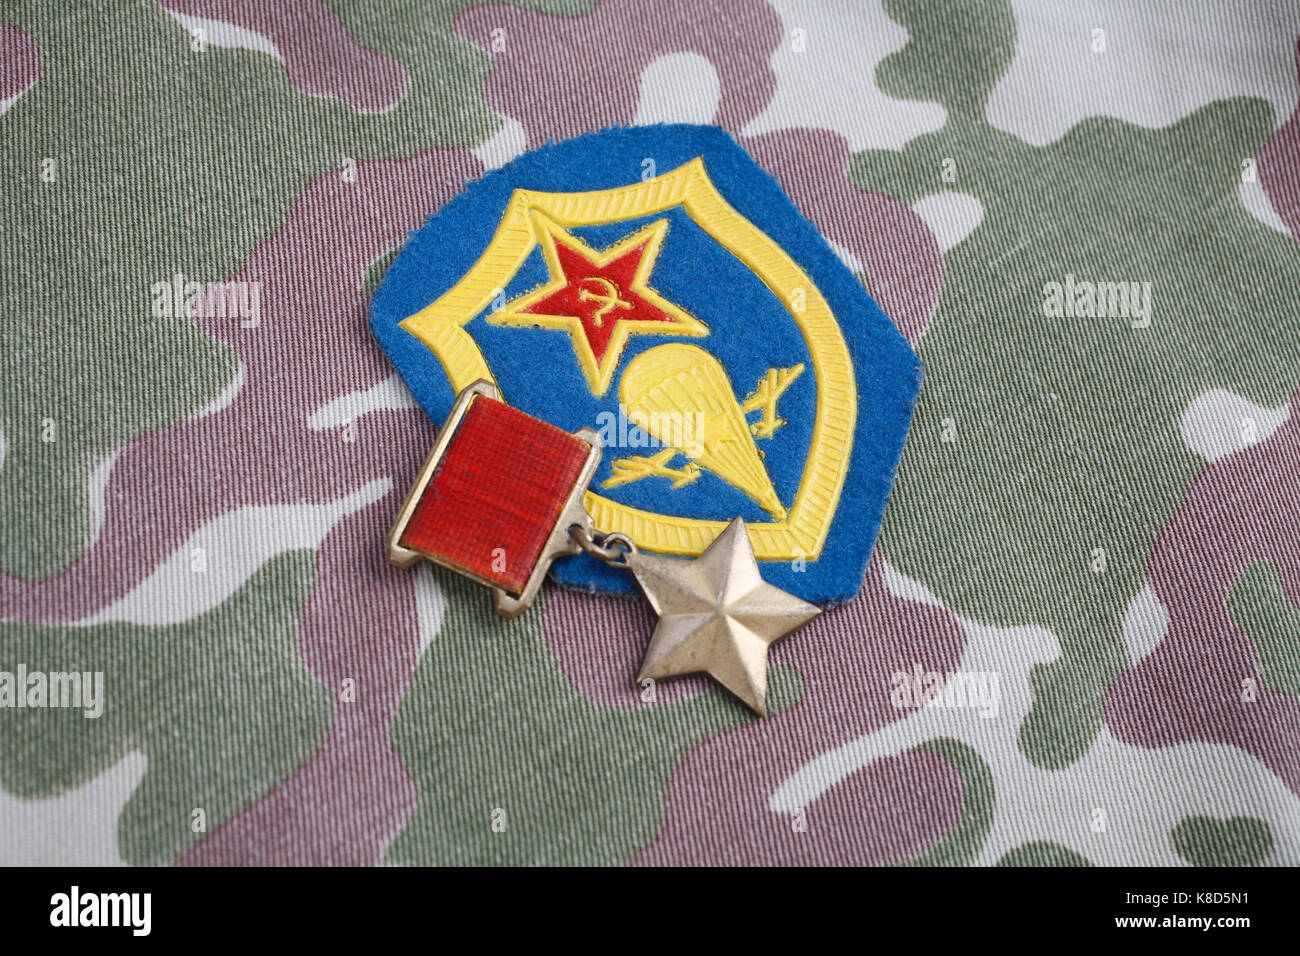 The Gold Star medal is a special insignia that identifies recipients of the title 'Hero' in the Soviet Union on Soviet and Airborne forces shoulder pa Stock Photo